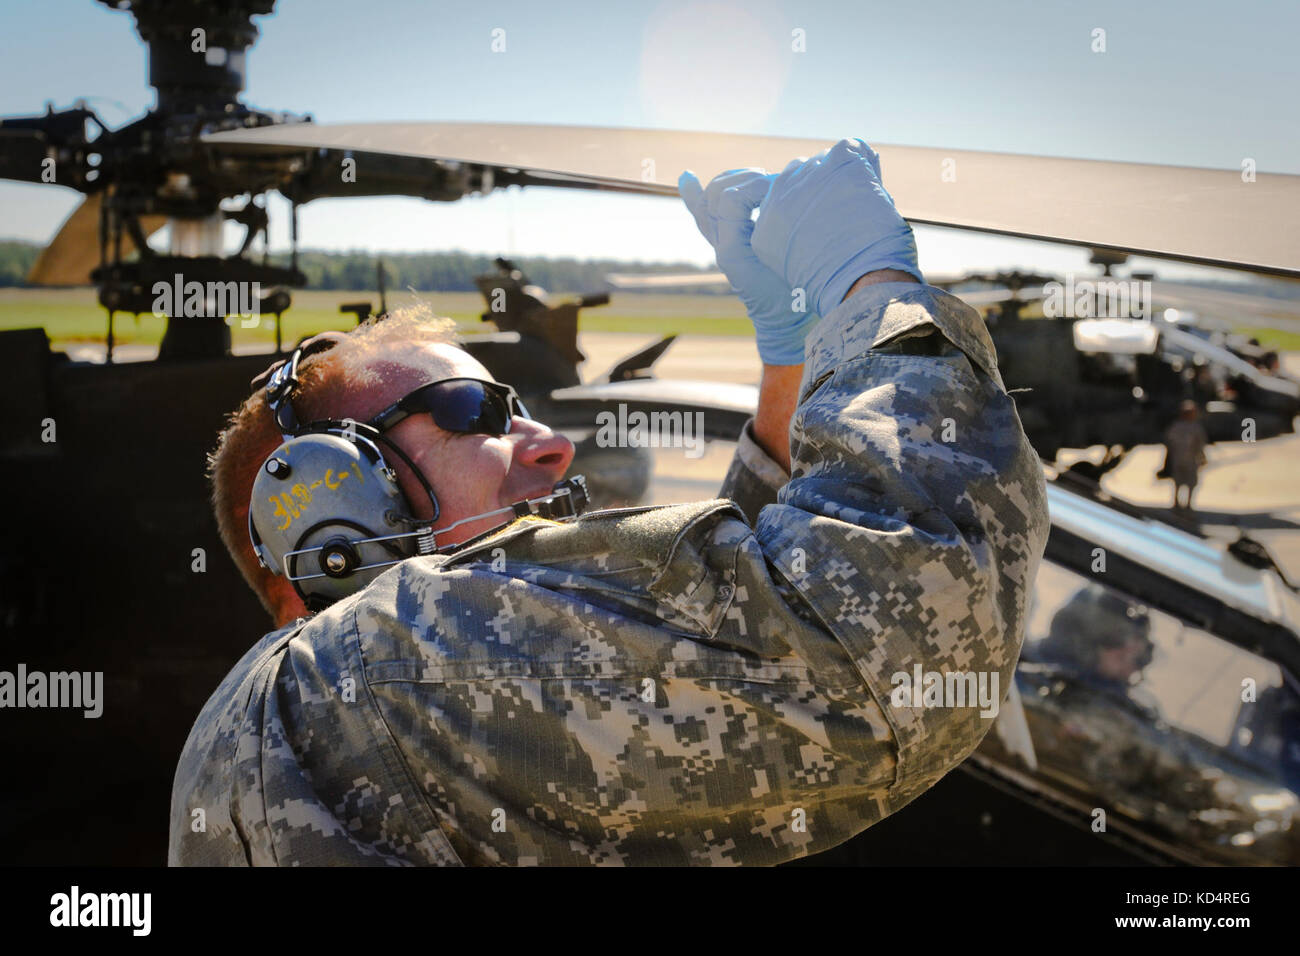 Sgt. Jacob Reese, a AH-64D “Apache” Attack Helicopter Repairer, with the S.C. Army National Guard’s 1-151 Attack Reconnaissance Battalion, installs a blade wedge on the main rotor of the aircraft, Oct. 5, 2014, at McEntire Joint National Guard Base.  Maintainers install blade wedges on the highly sensitive main rotors to reduce vibration and to increase smoothness of flight.  (U.S. Army National Guard photo by Sgt. Brian Calhoun/Released) Stock Photo